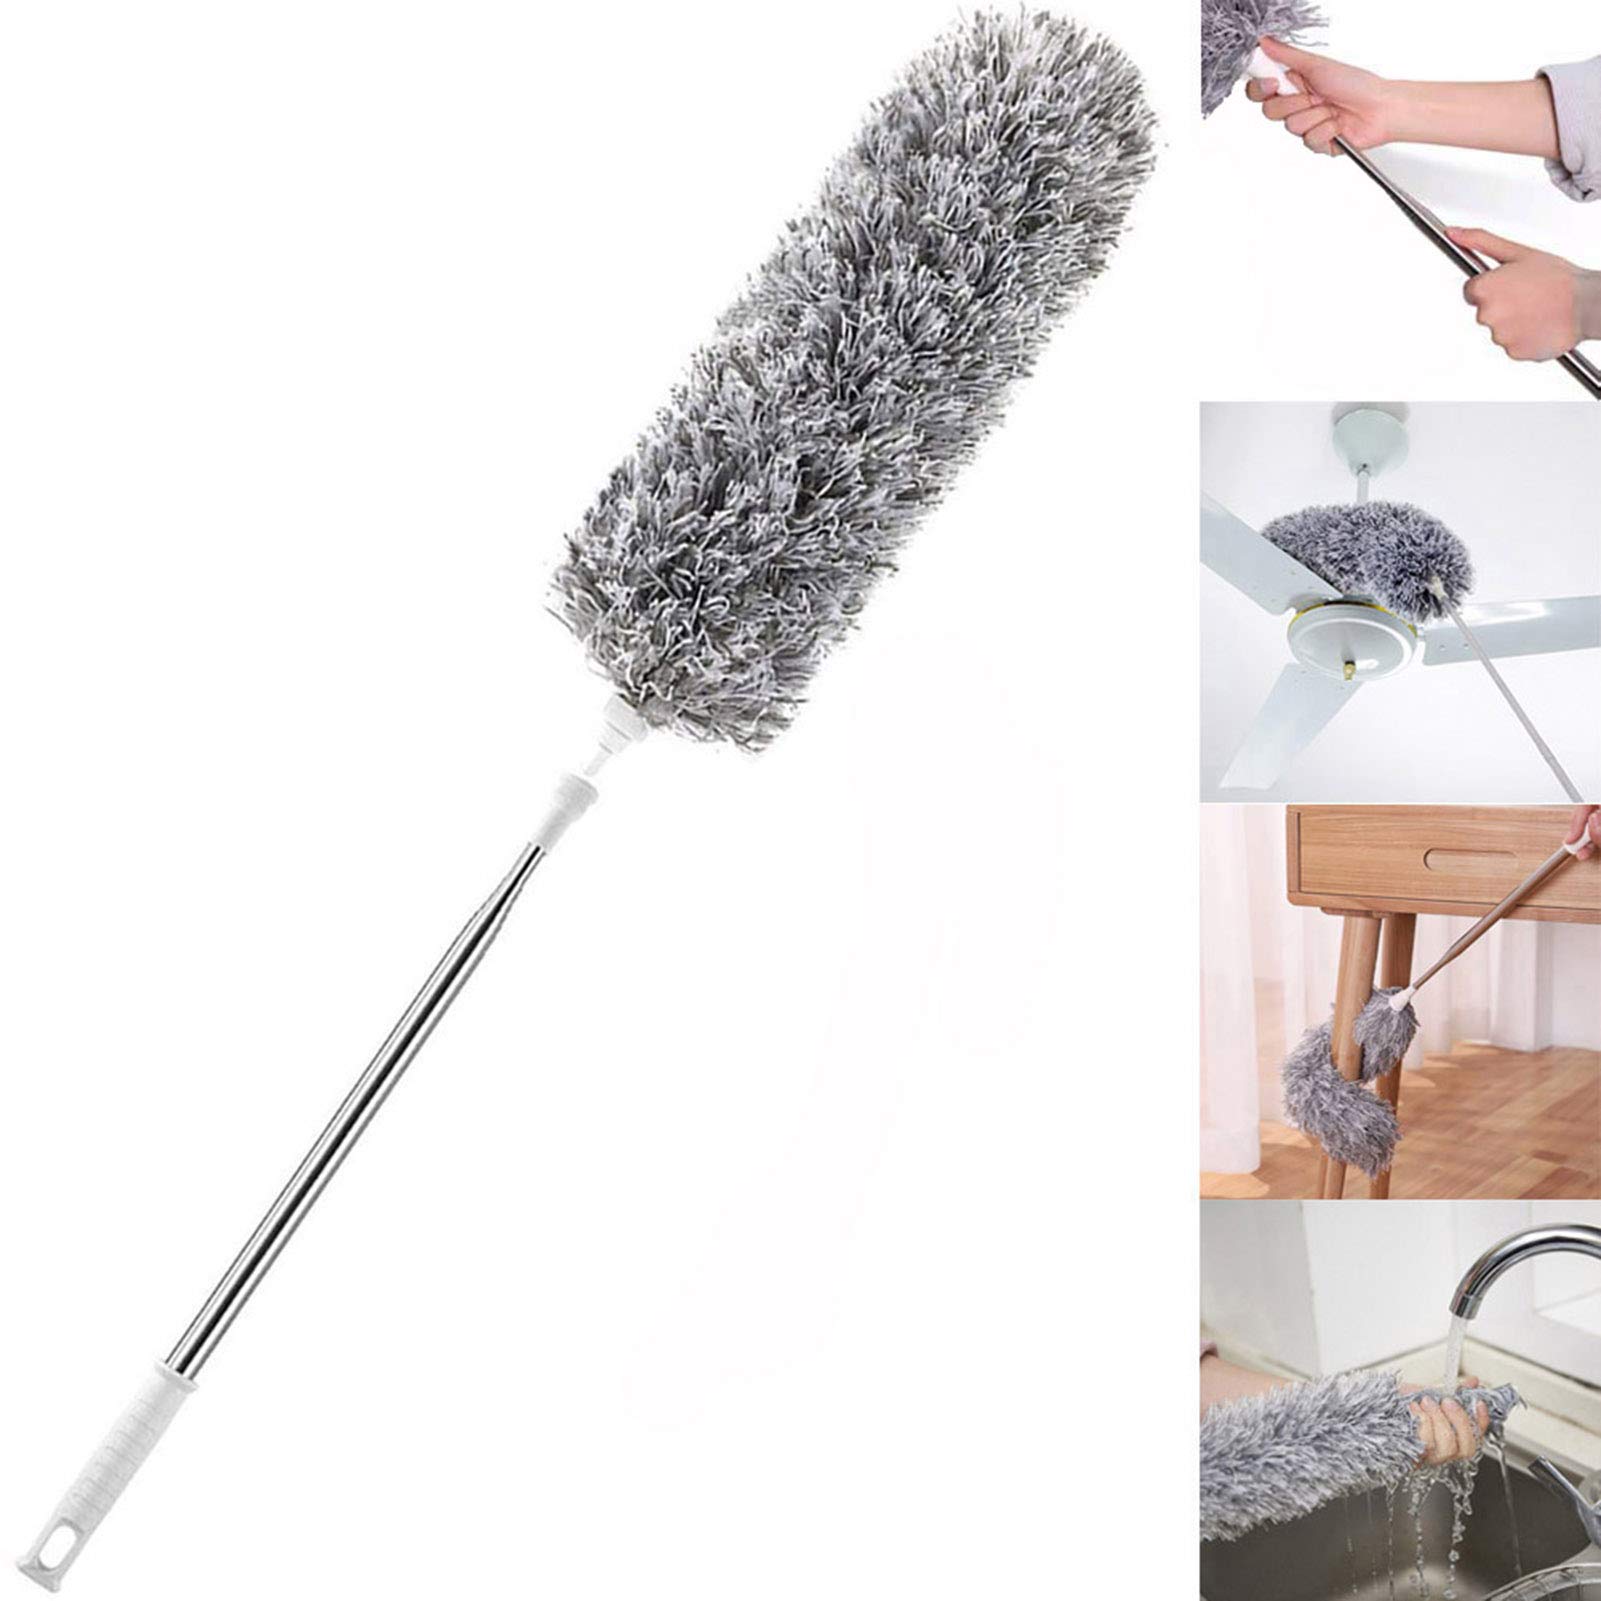 1 X Long Microfiber Duster Bendable Flexible Cleaning Brush Dust Cleaner  Handle